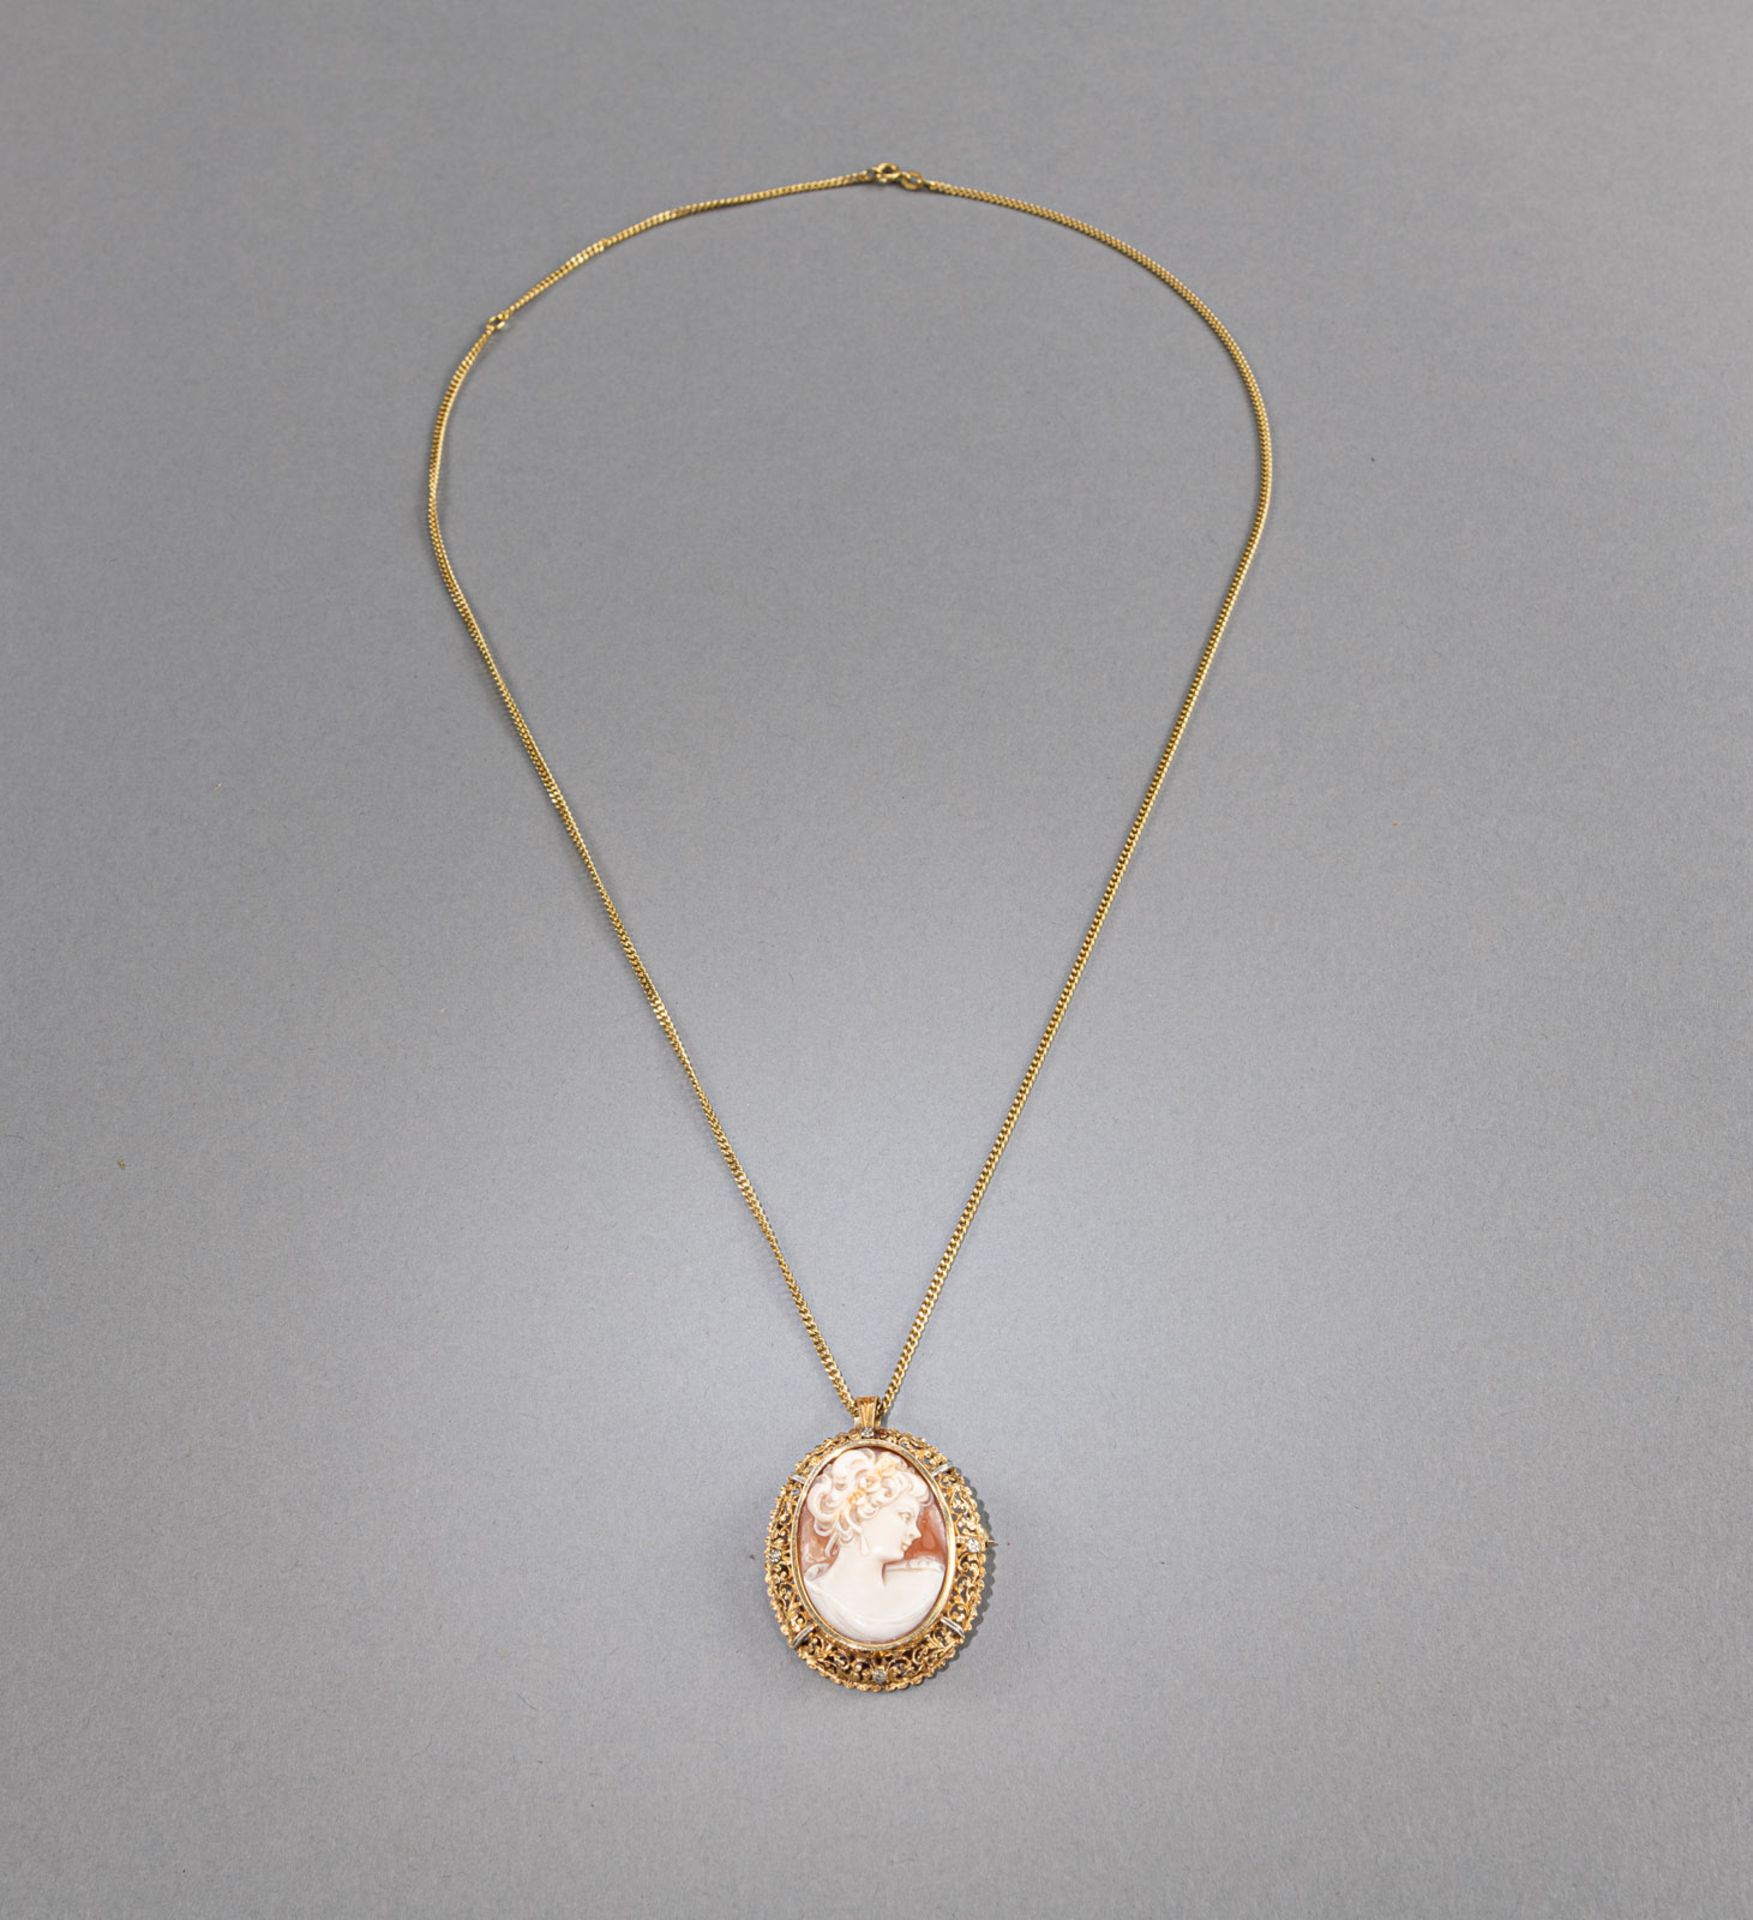 SHELL CAMEO BROOCH AND PENDANT WITH NECKLACE - Image 4 of 6